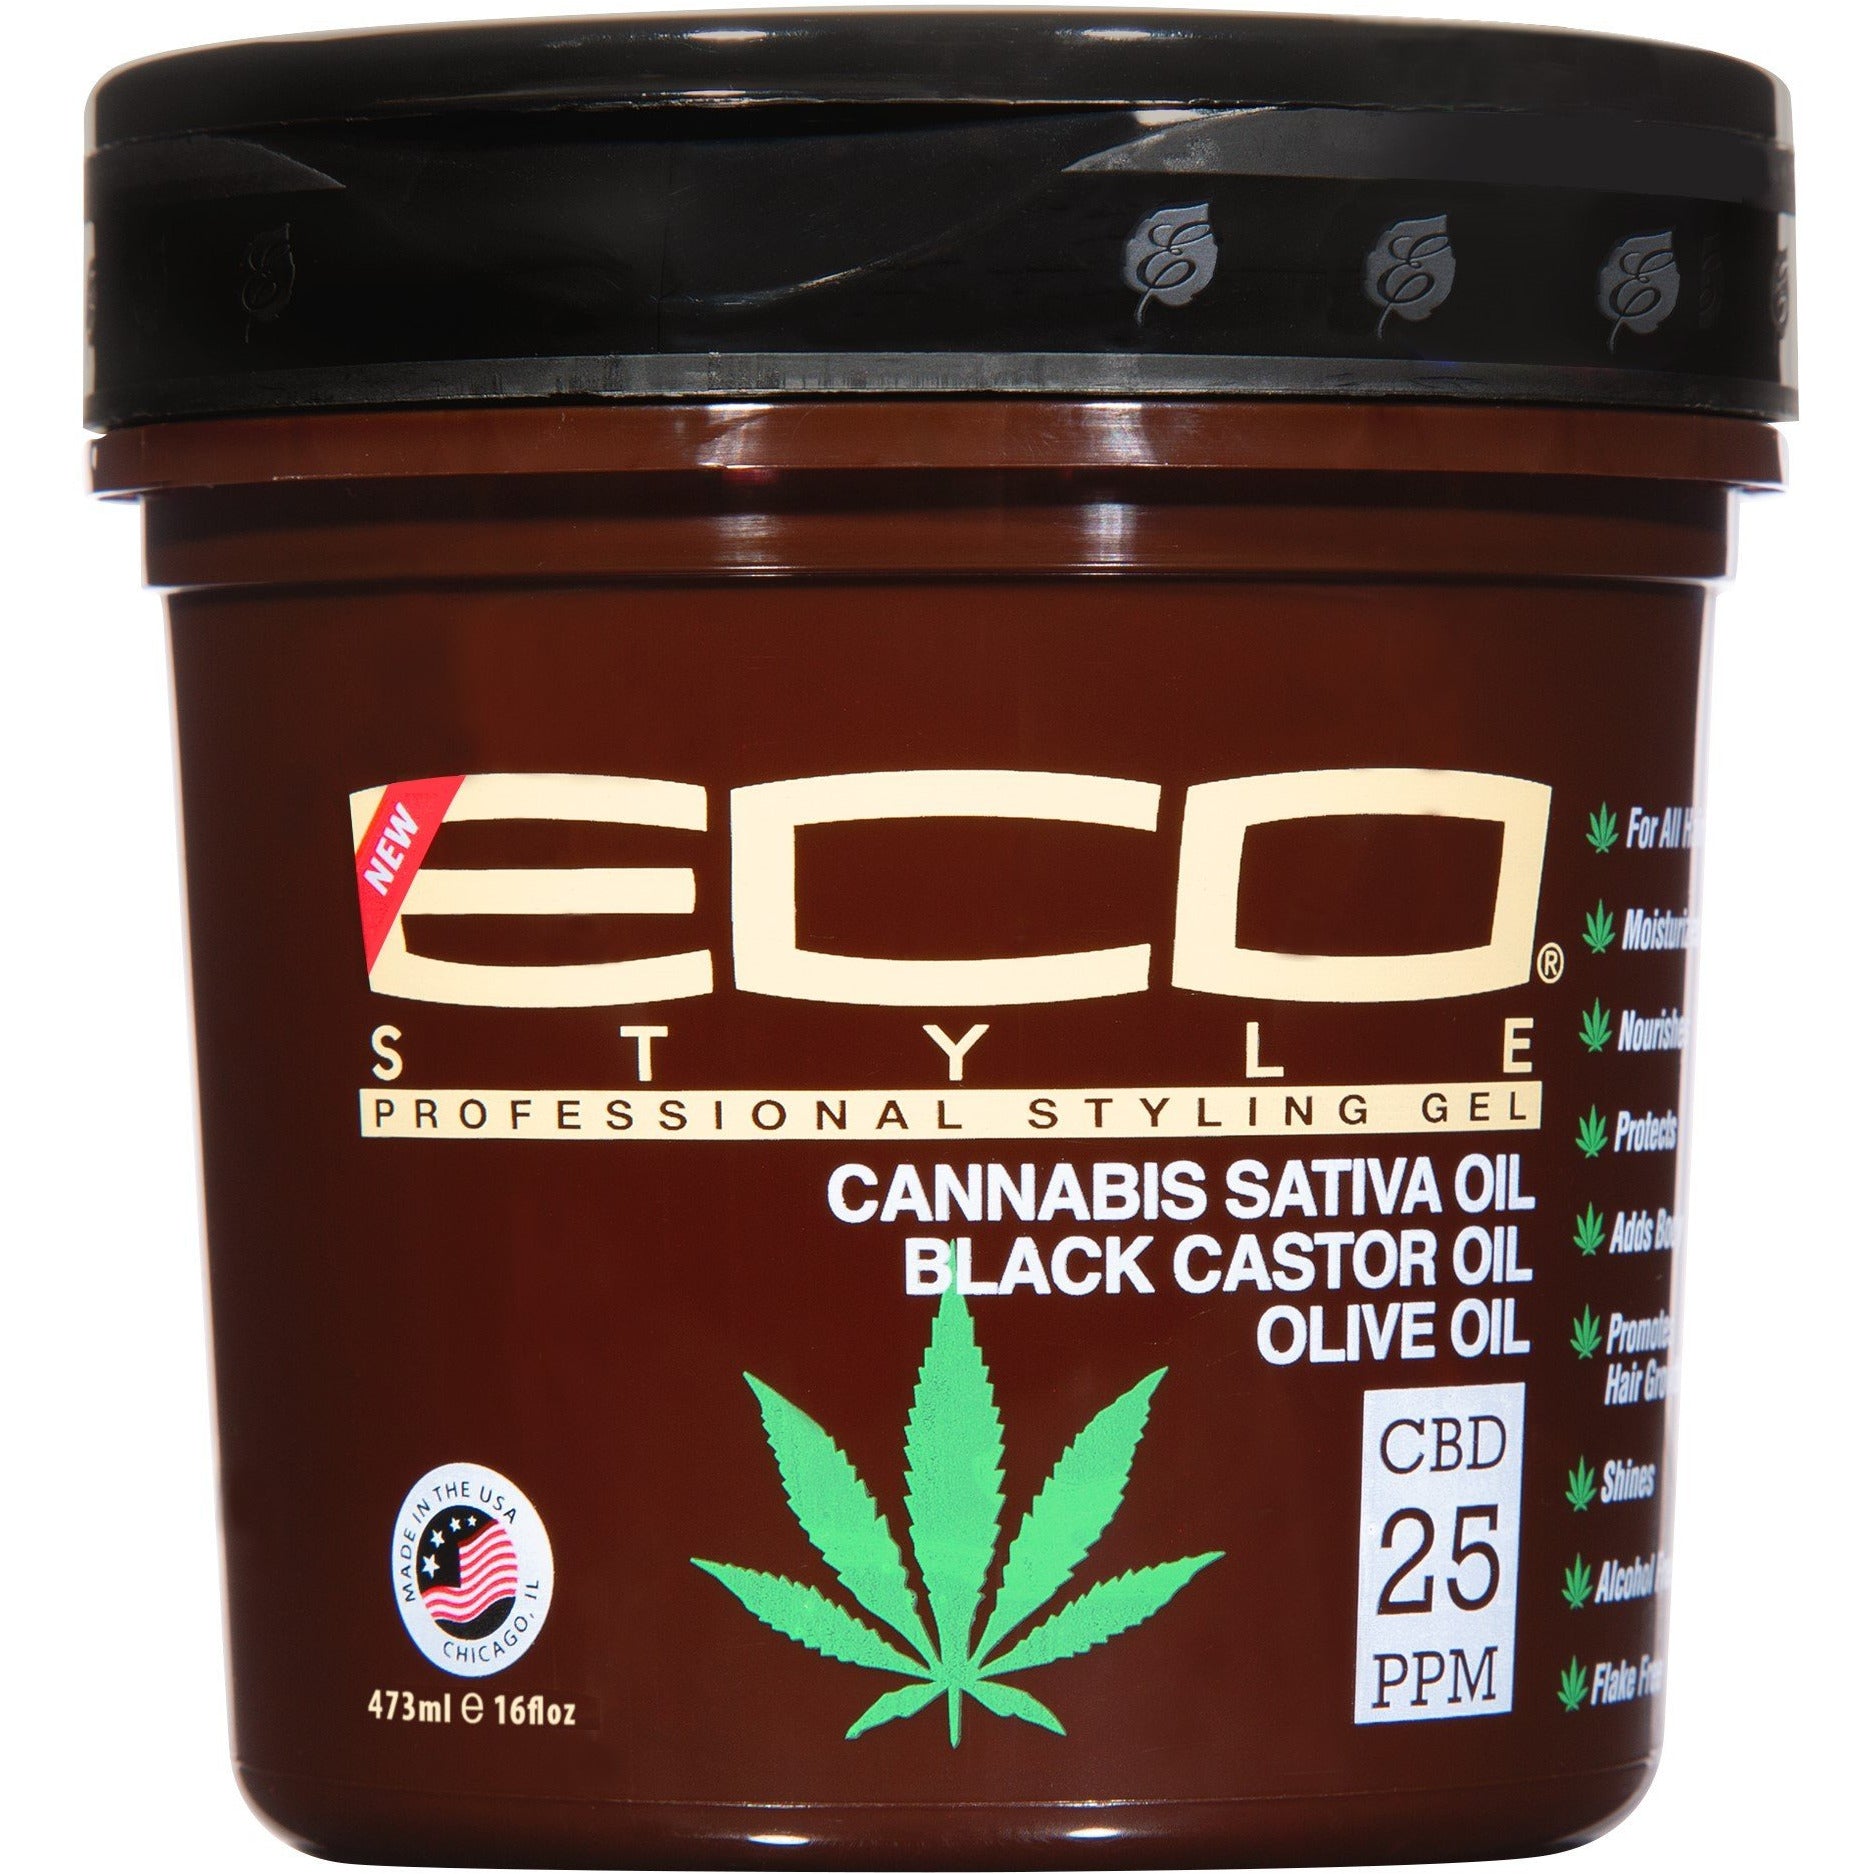 4th Ave Market: Eco Styler Cannabis Sativa Oil Styling Gel